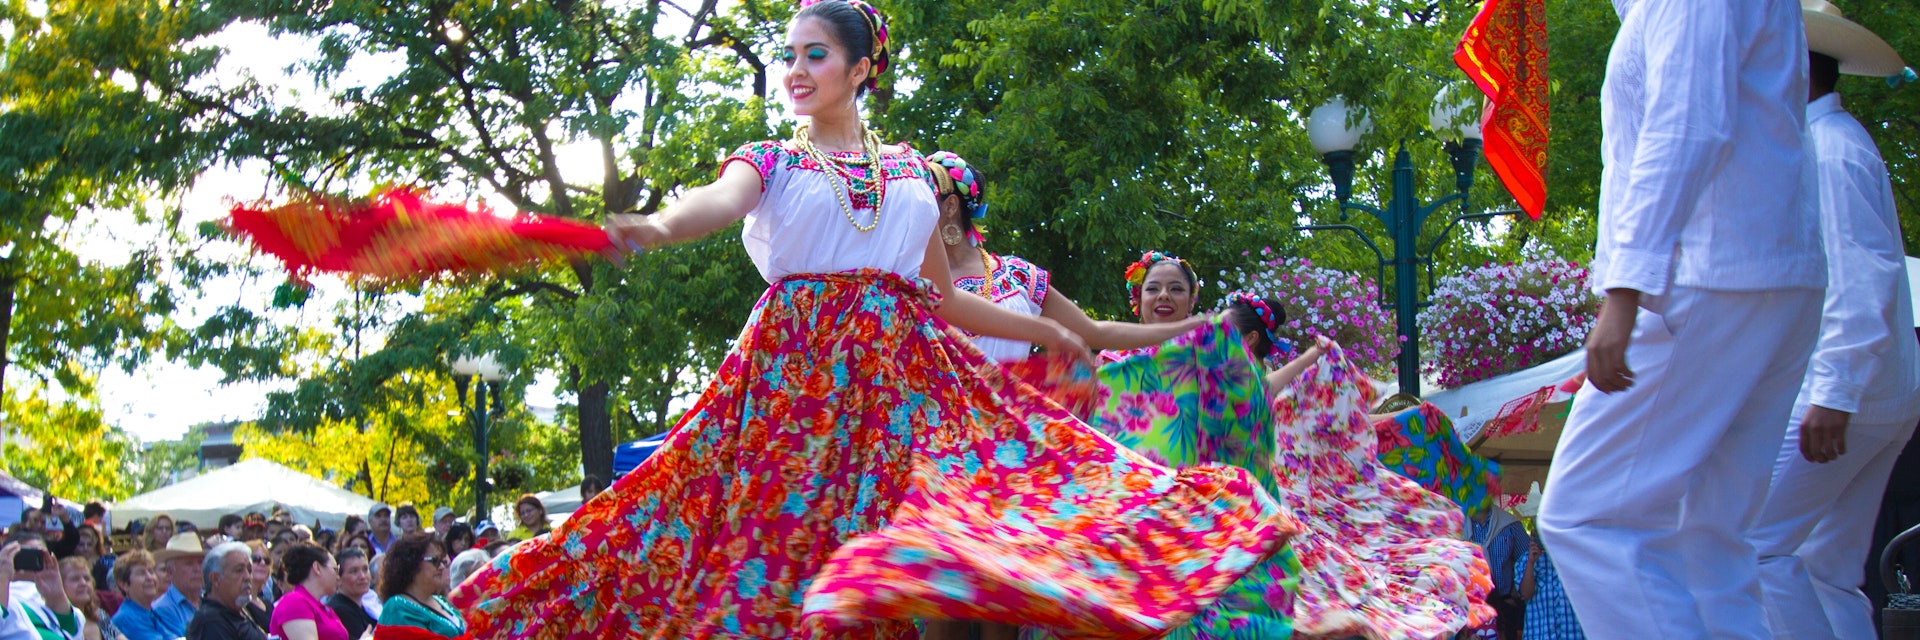 Santa Fe, NM, USA - September 17, 2016: A dance troupe performs a Mexican folk dance on the historic Santa Fe, NM Plaza during a Mexican Independence Day celebration. New Mexico was part of the Mexican Republic for 25 years and has many citizens of Mexican heritage.